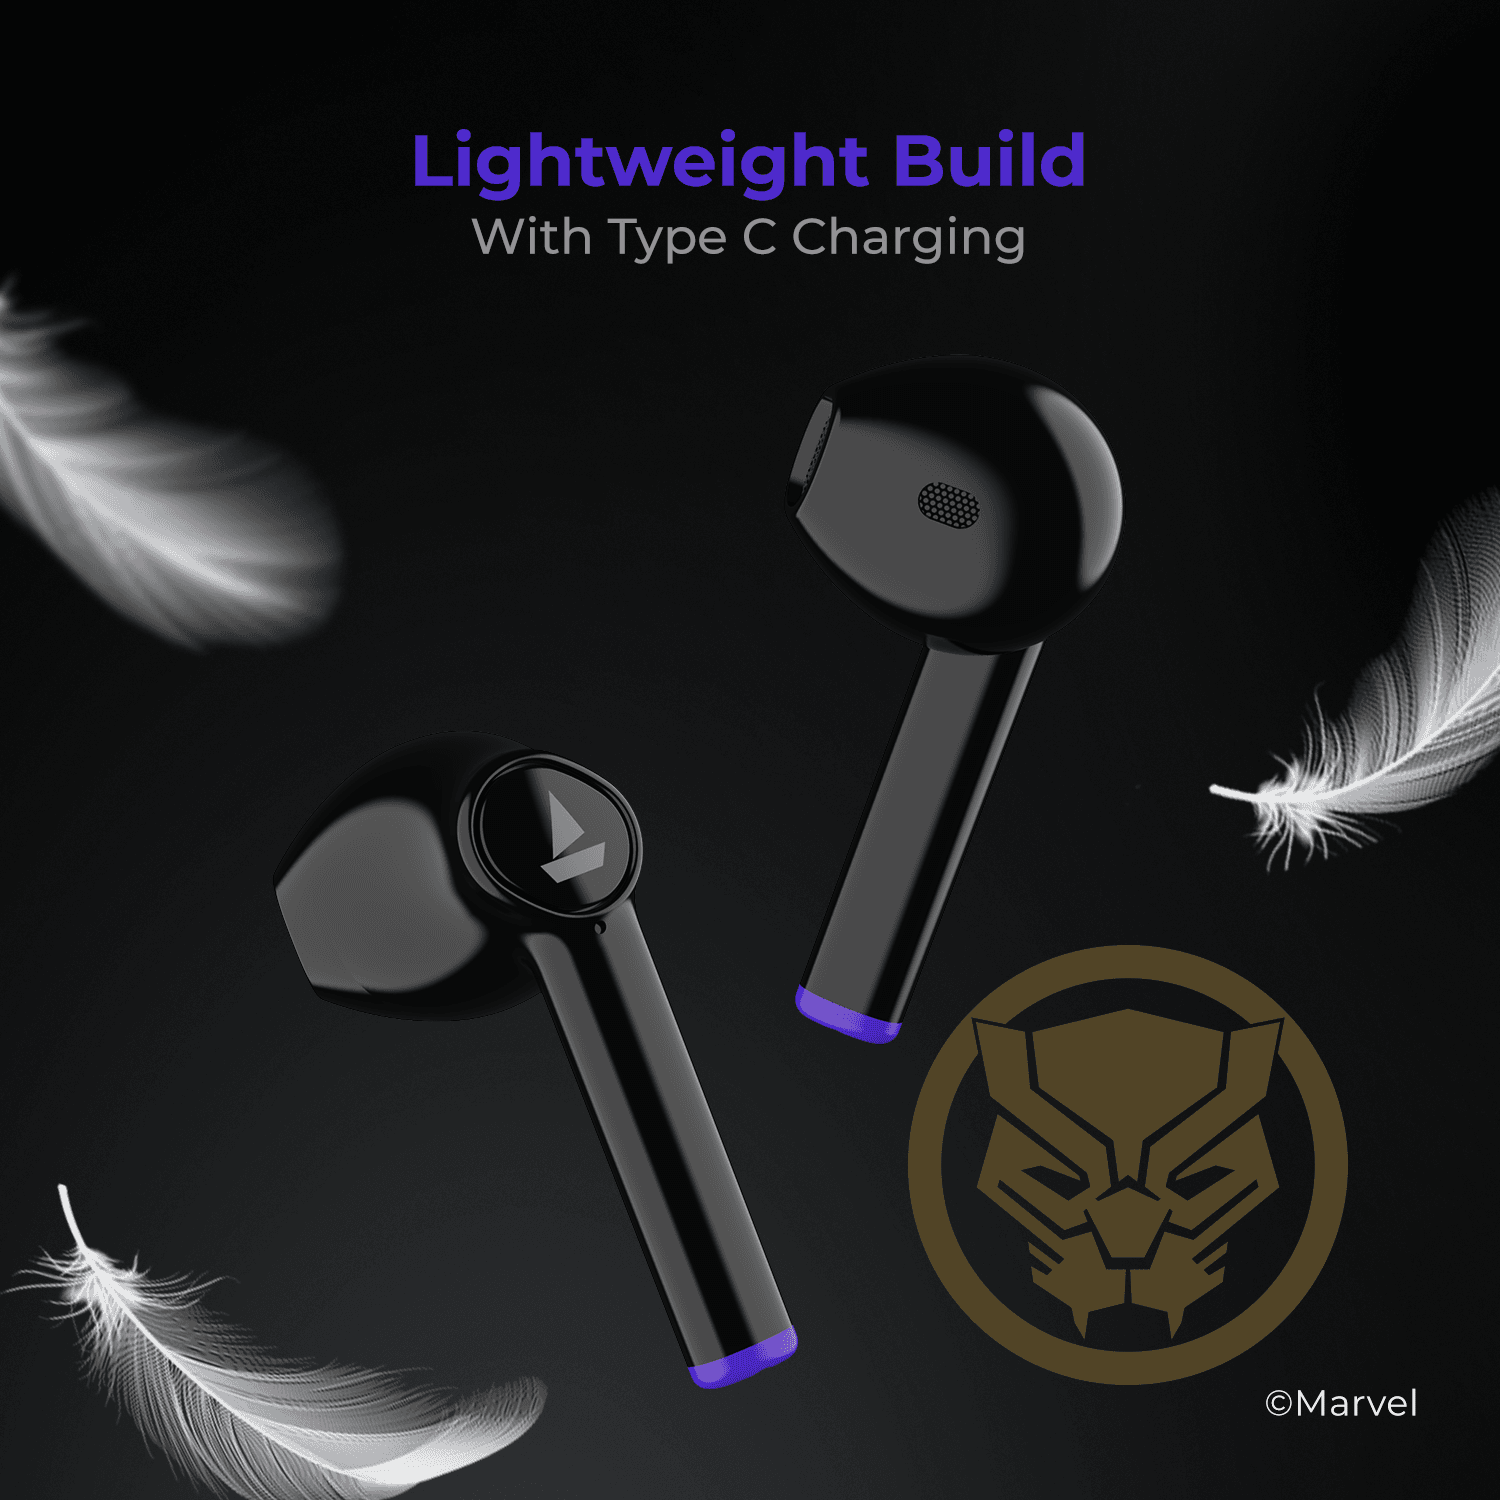 boAt Airdopes 131 Black Panther Marvel Edition | Wireless Earbuds with 13mm Audio Drivers, IWP Technology with Bluetooth v5.0, Type-c Charging, Upto 60 Hours Playback